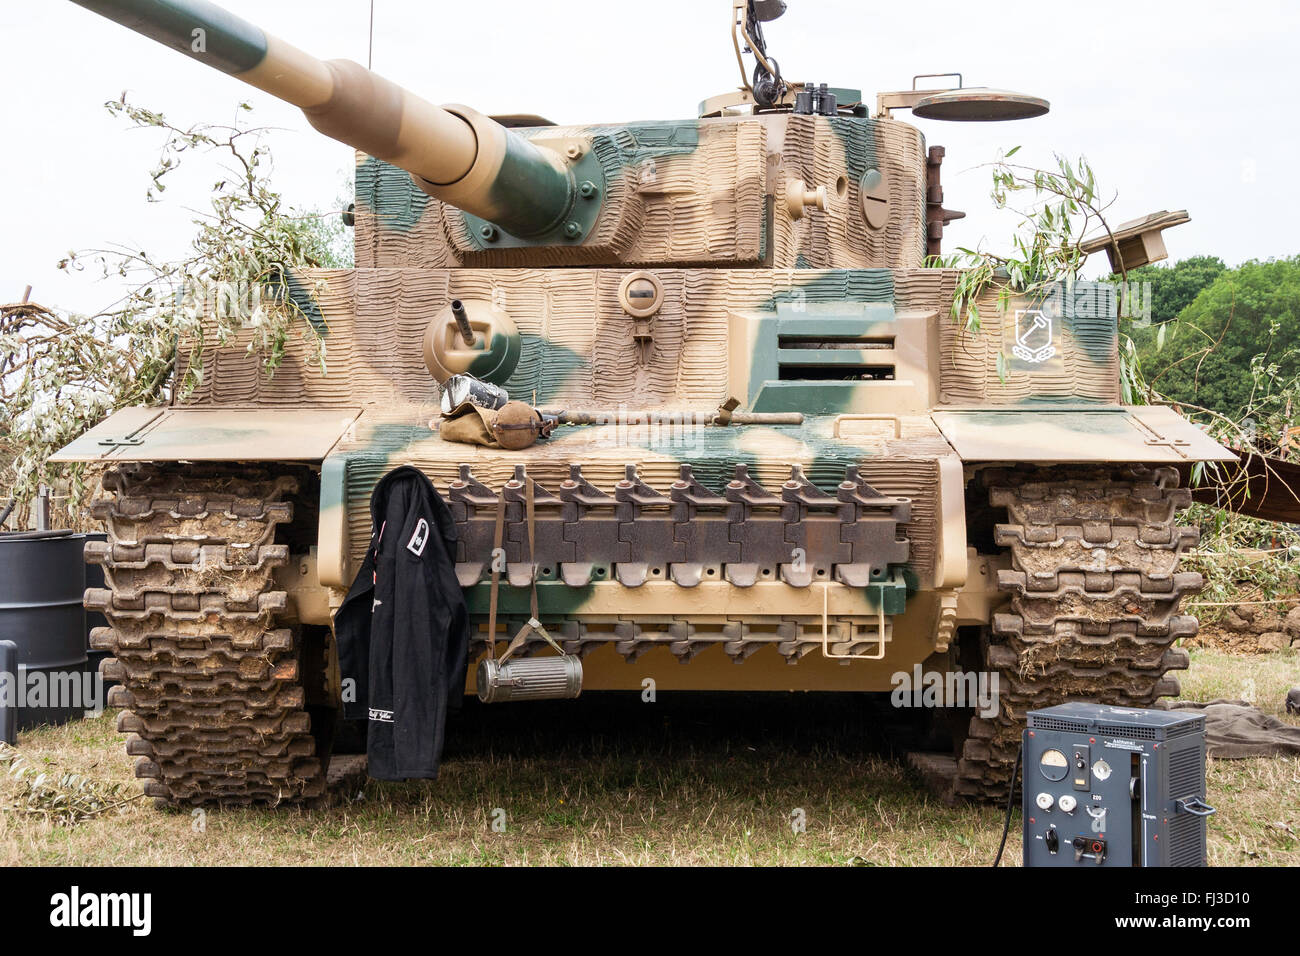 Second world was re-enactment. Front view of German Tiger tank in green and brown camouflage pattern, with 88mm gun. Stock Photo